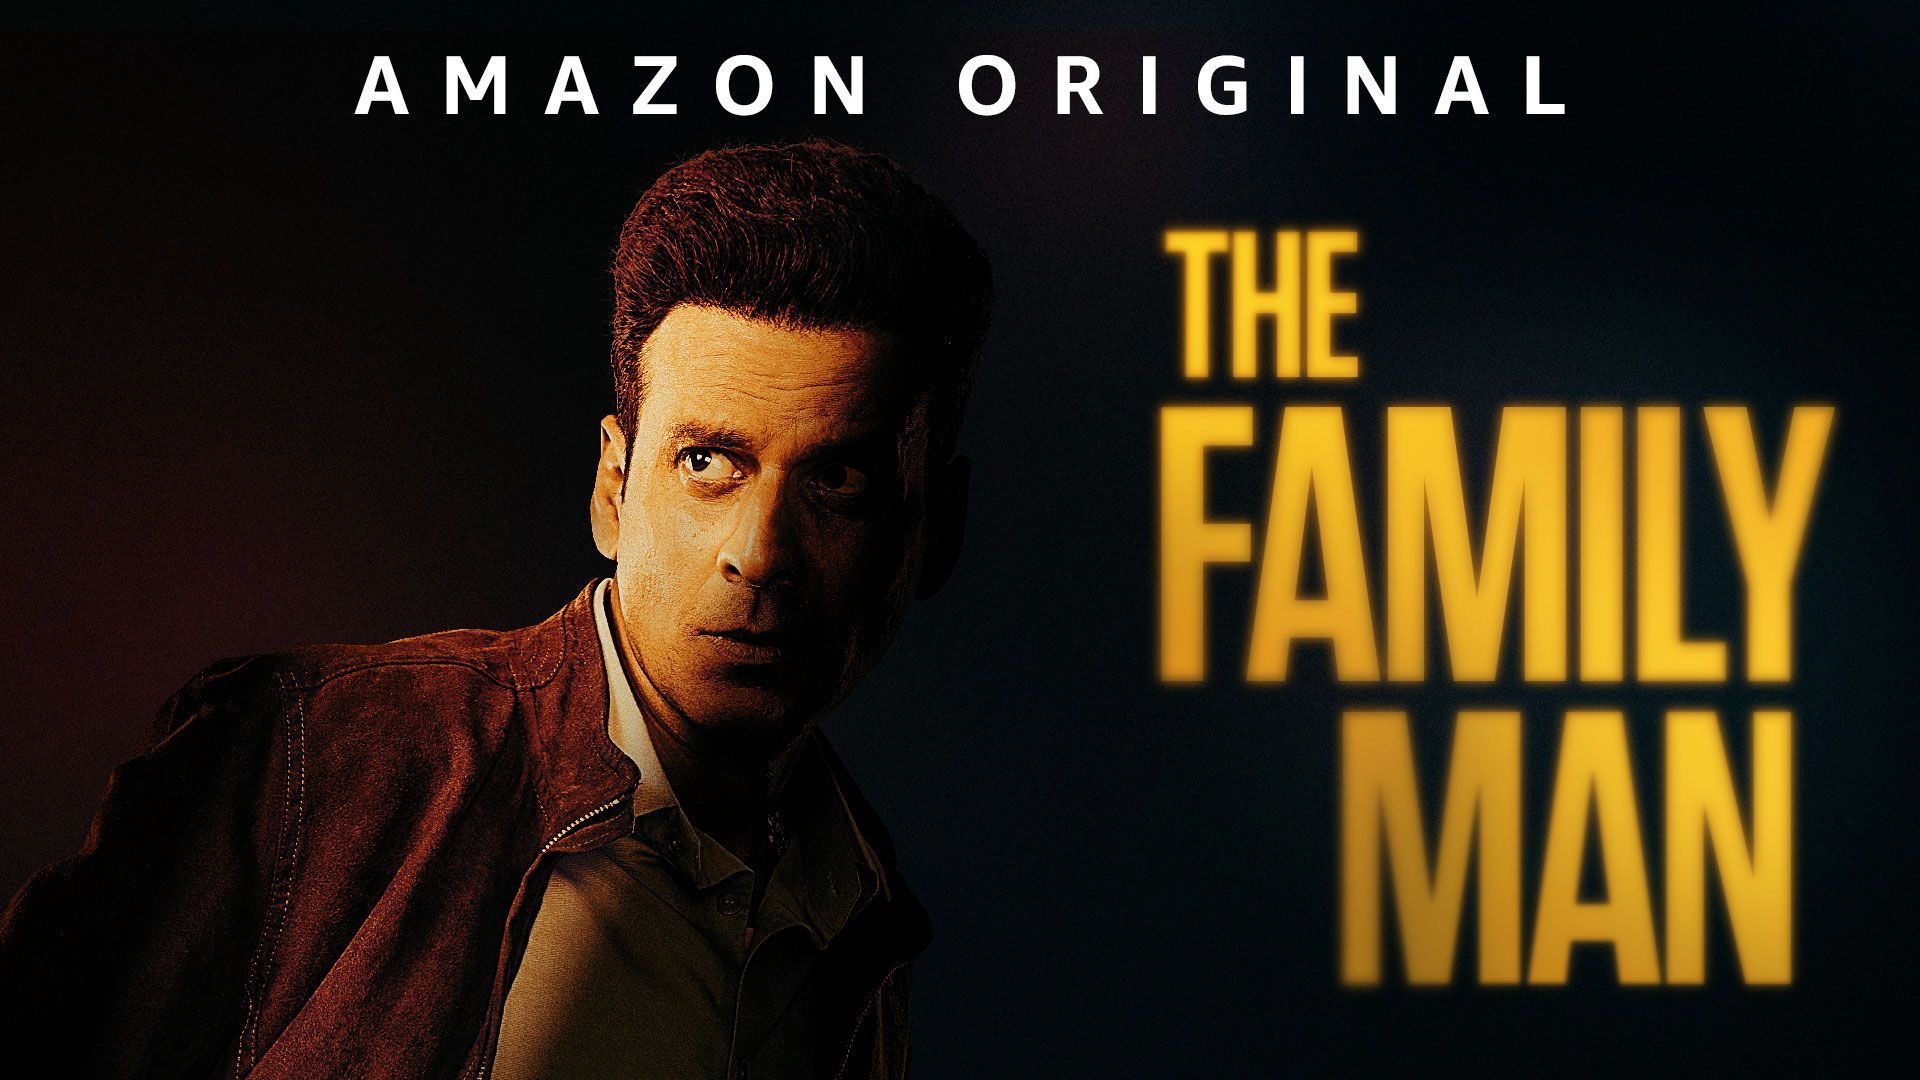 The Family Man Wallpaper Free The Family Man Background